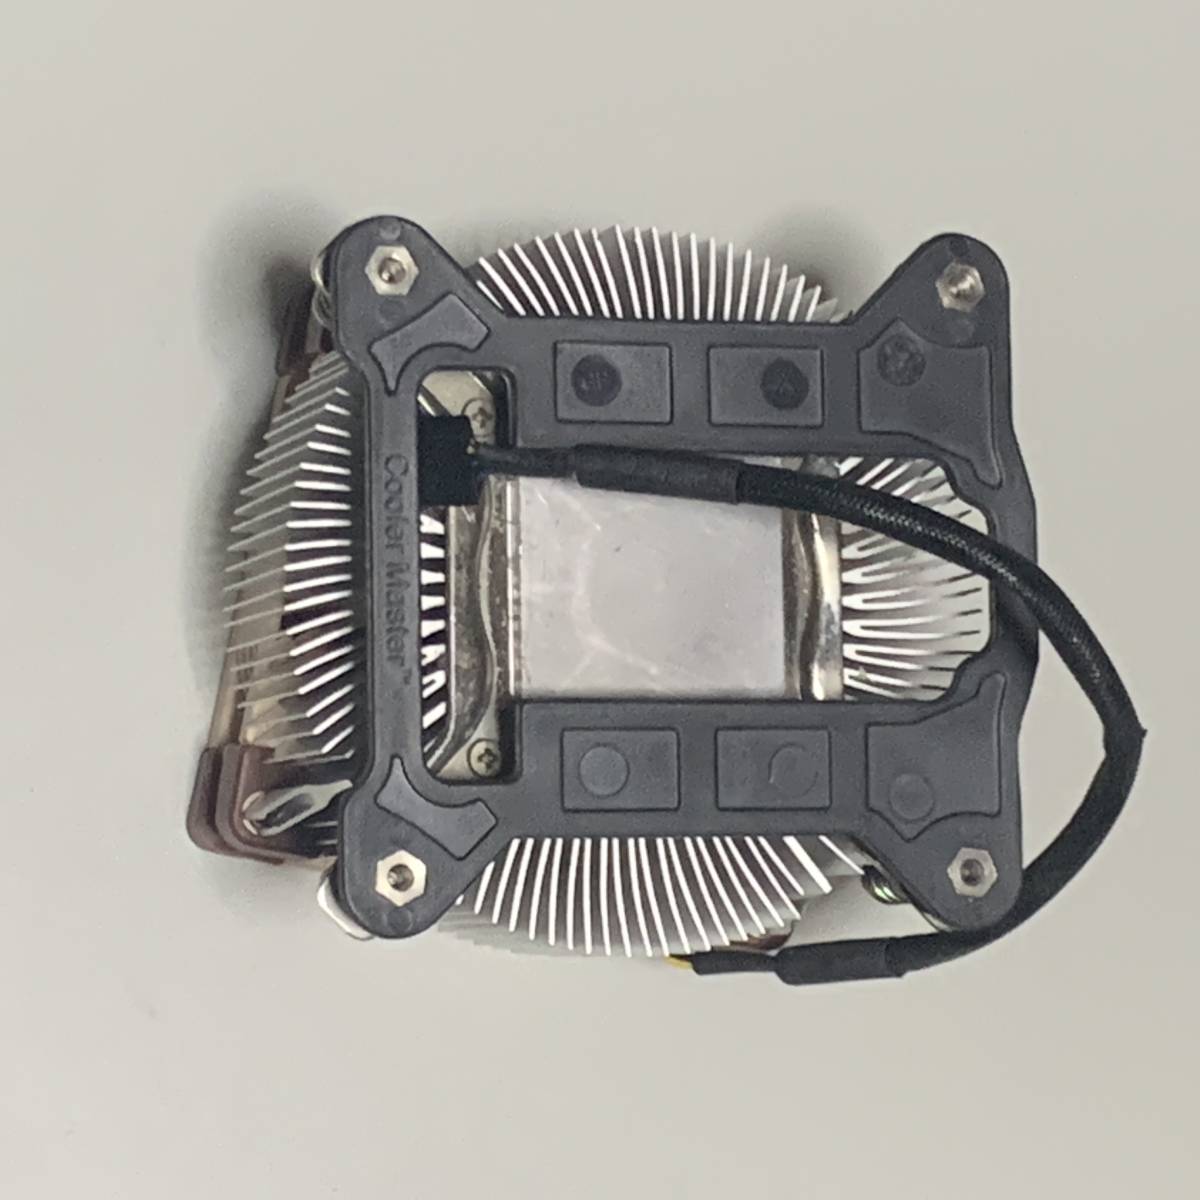 [ used ]CPU cooler,air conditioner back plate system Noctua made fan installing (Noctua made fan . replaced goods ) LGA115x/1200 correspondence / NF-A8 PWM